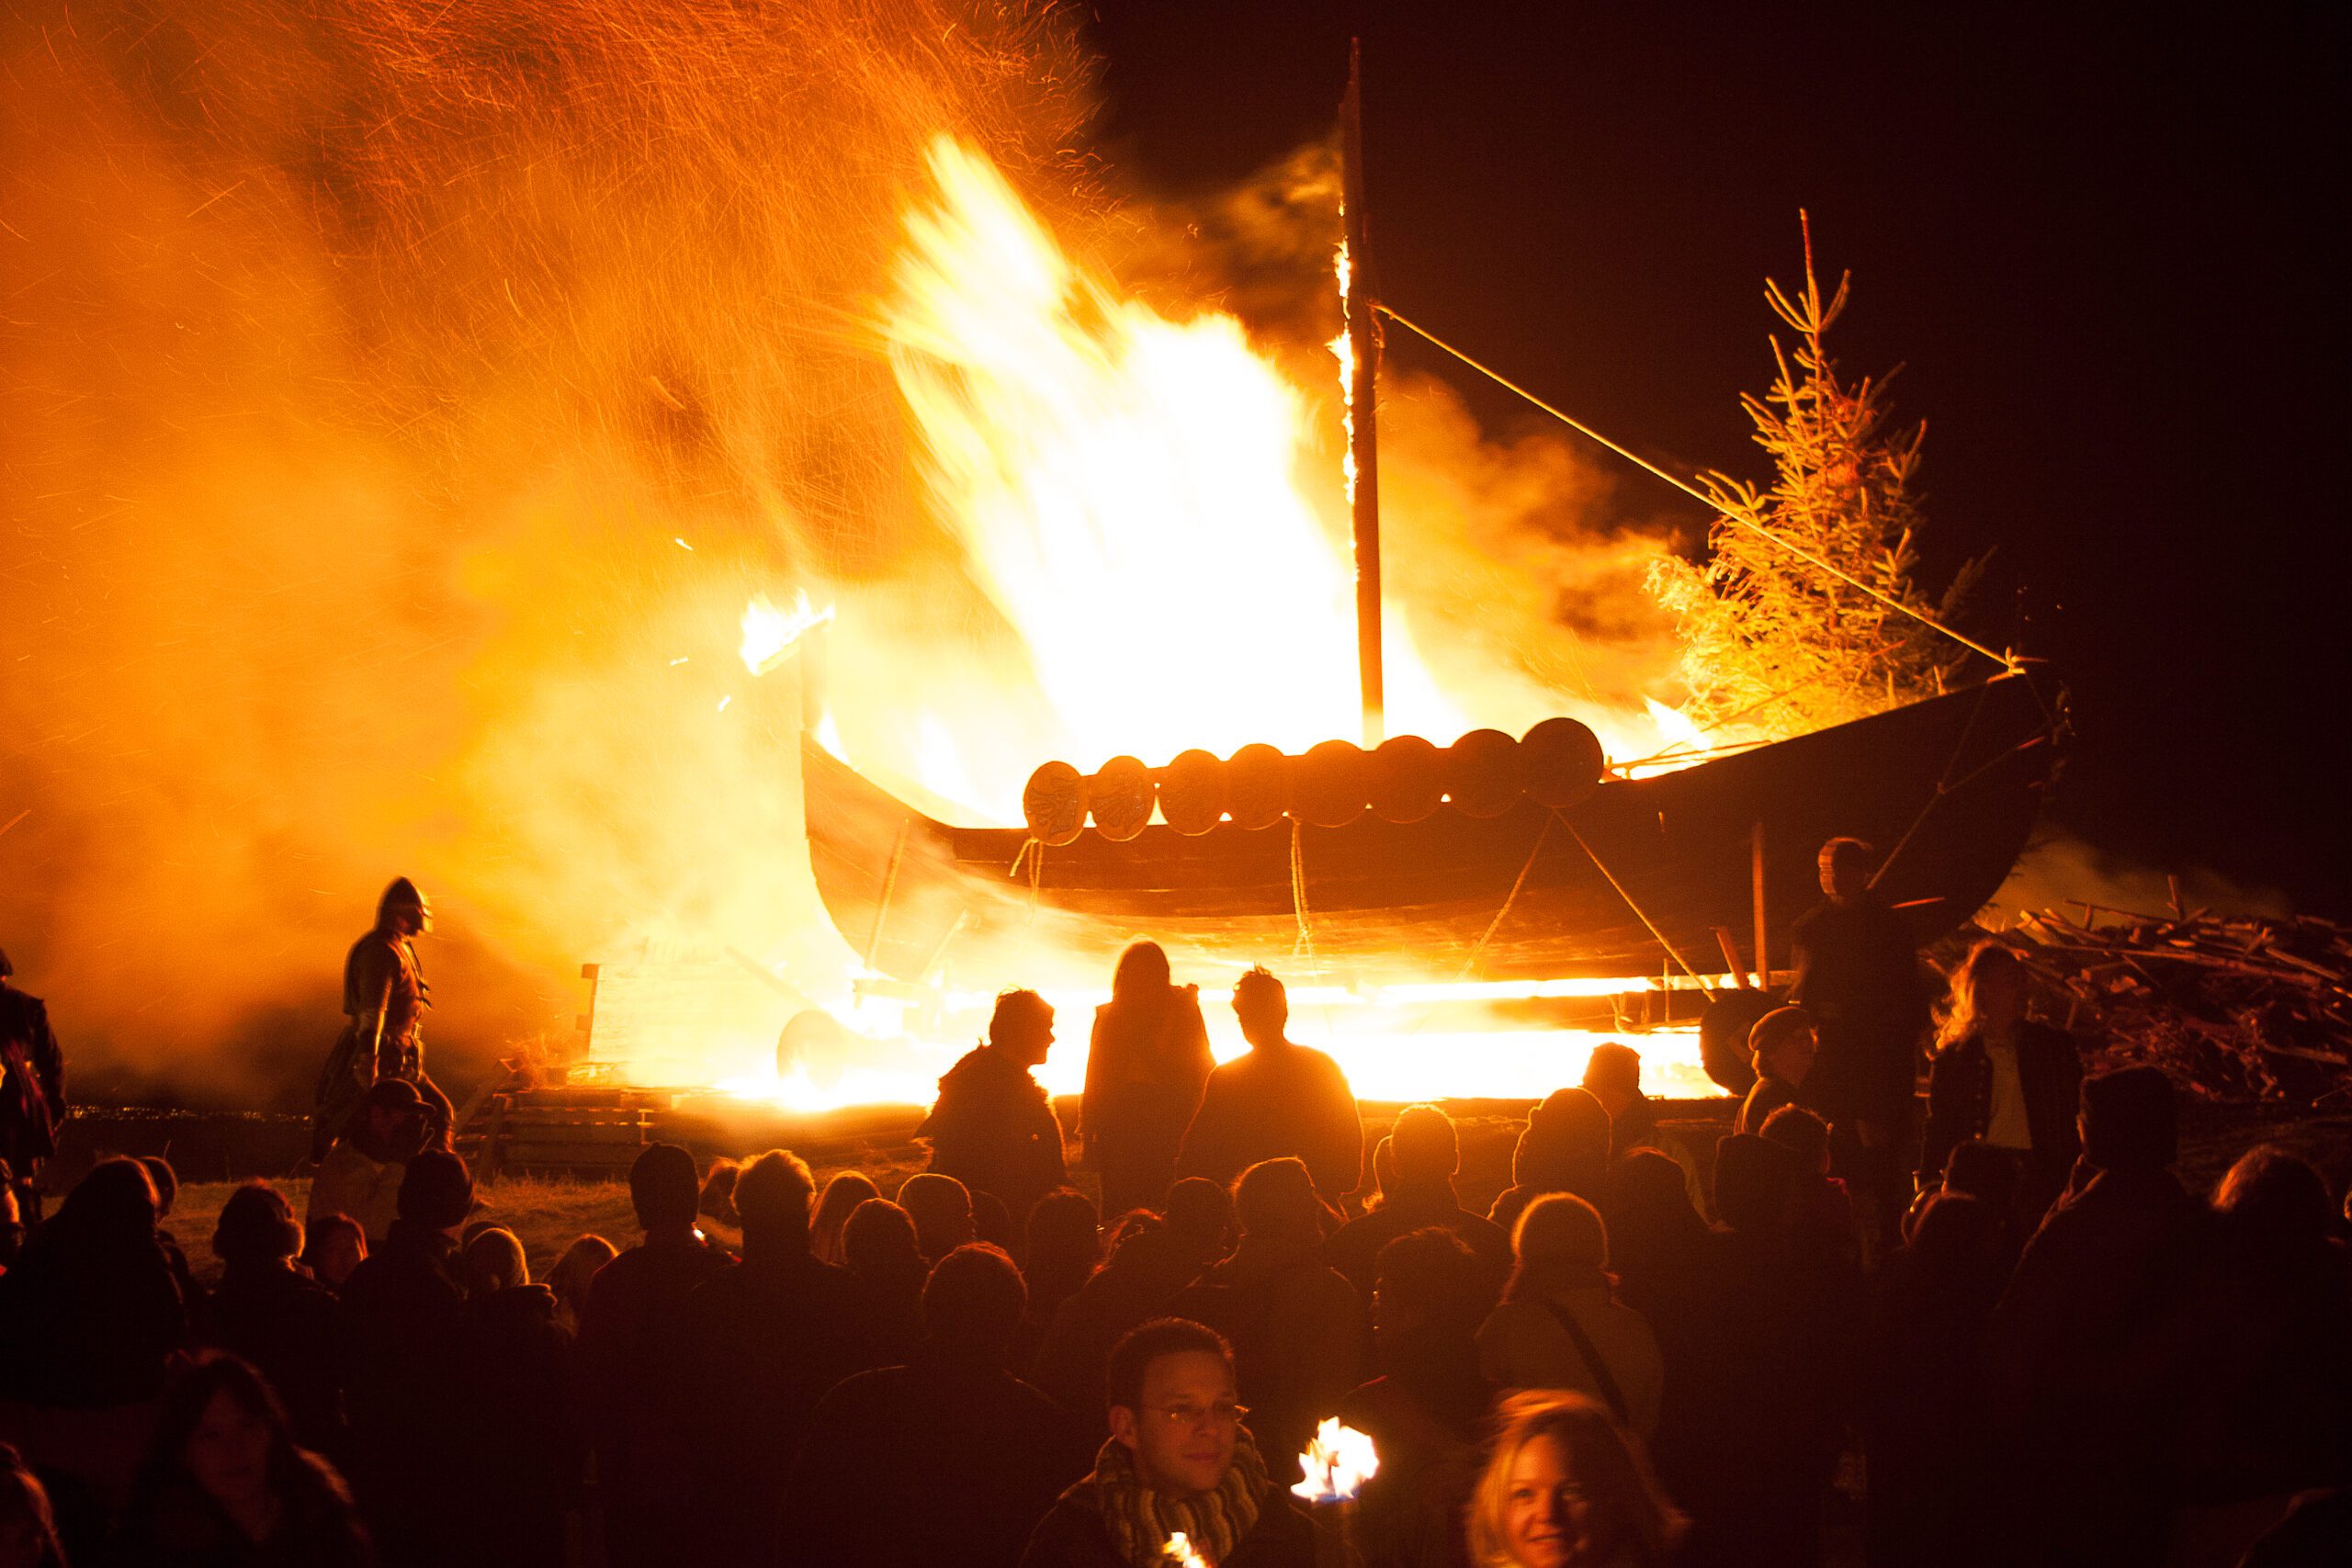 The burning of a viking long boat during up Helly AA celebrations in Edinburgh, Scotland by Nathan David Kelly Photographer